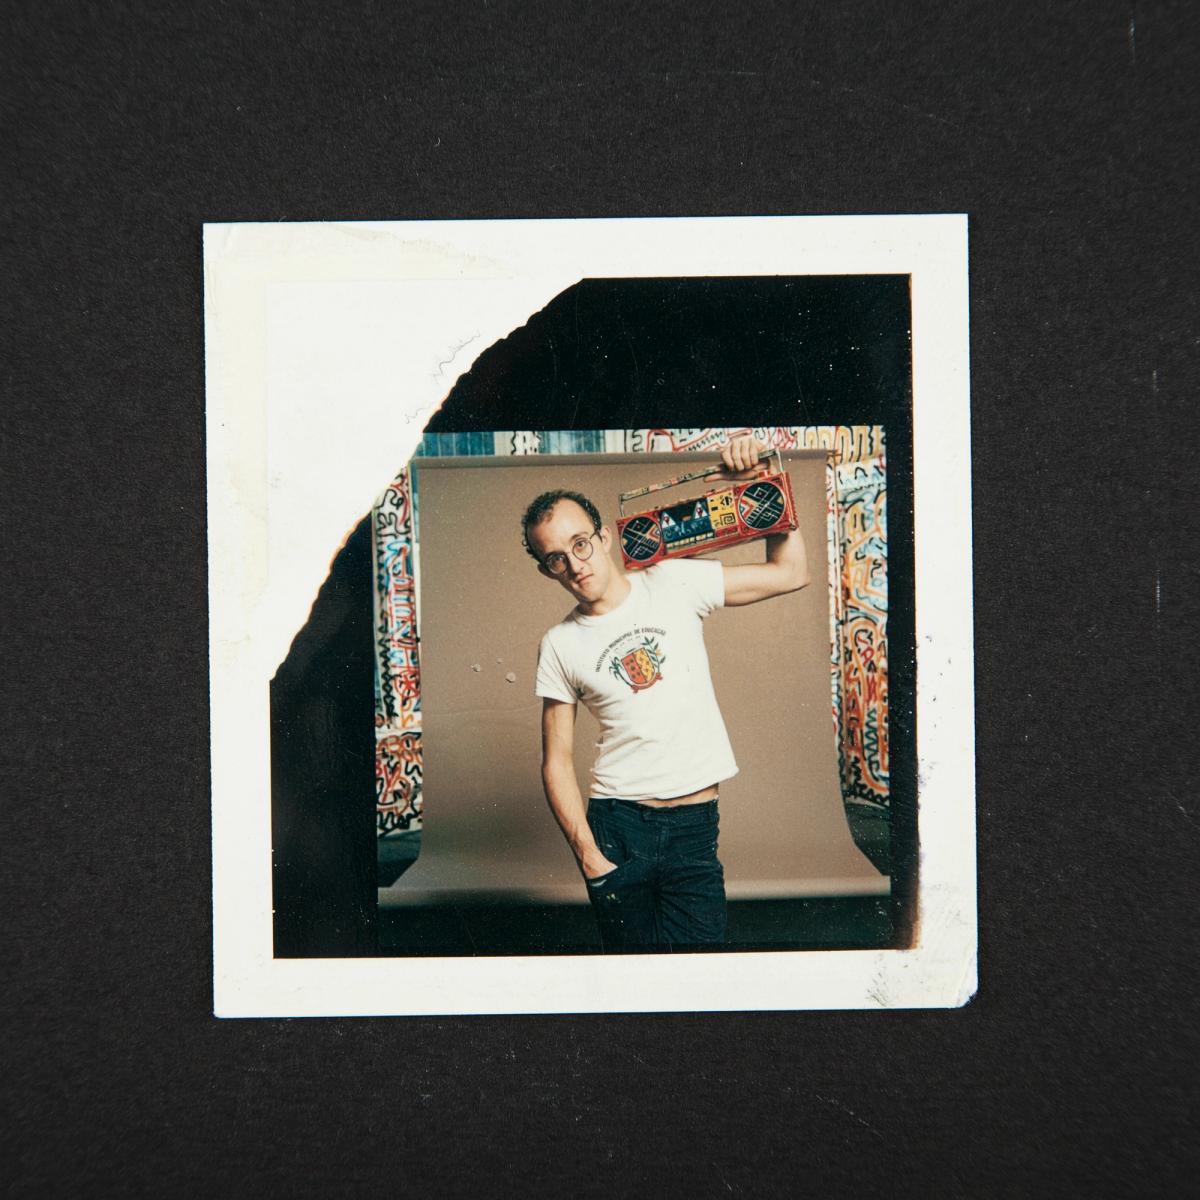 A Polaroid portrait of Keith Haring. © Keith Haring Foundation